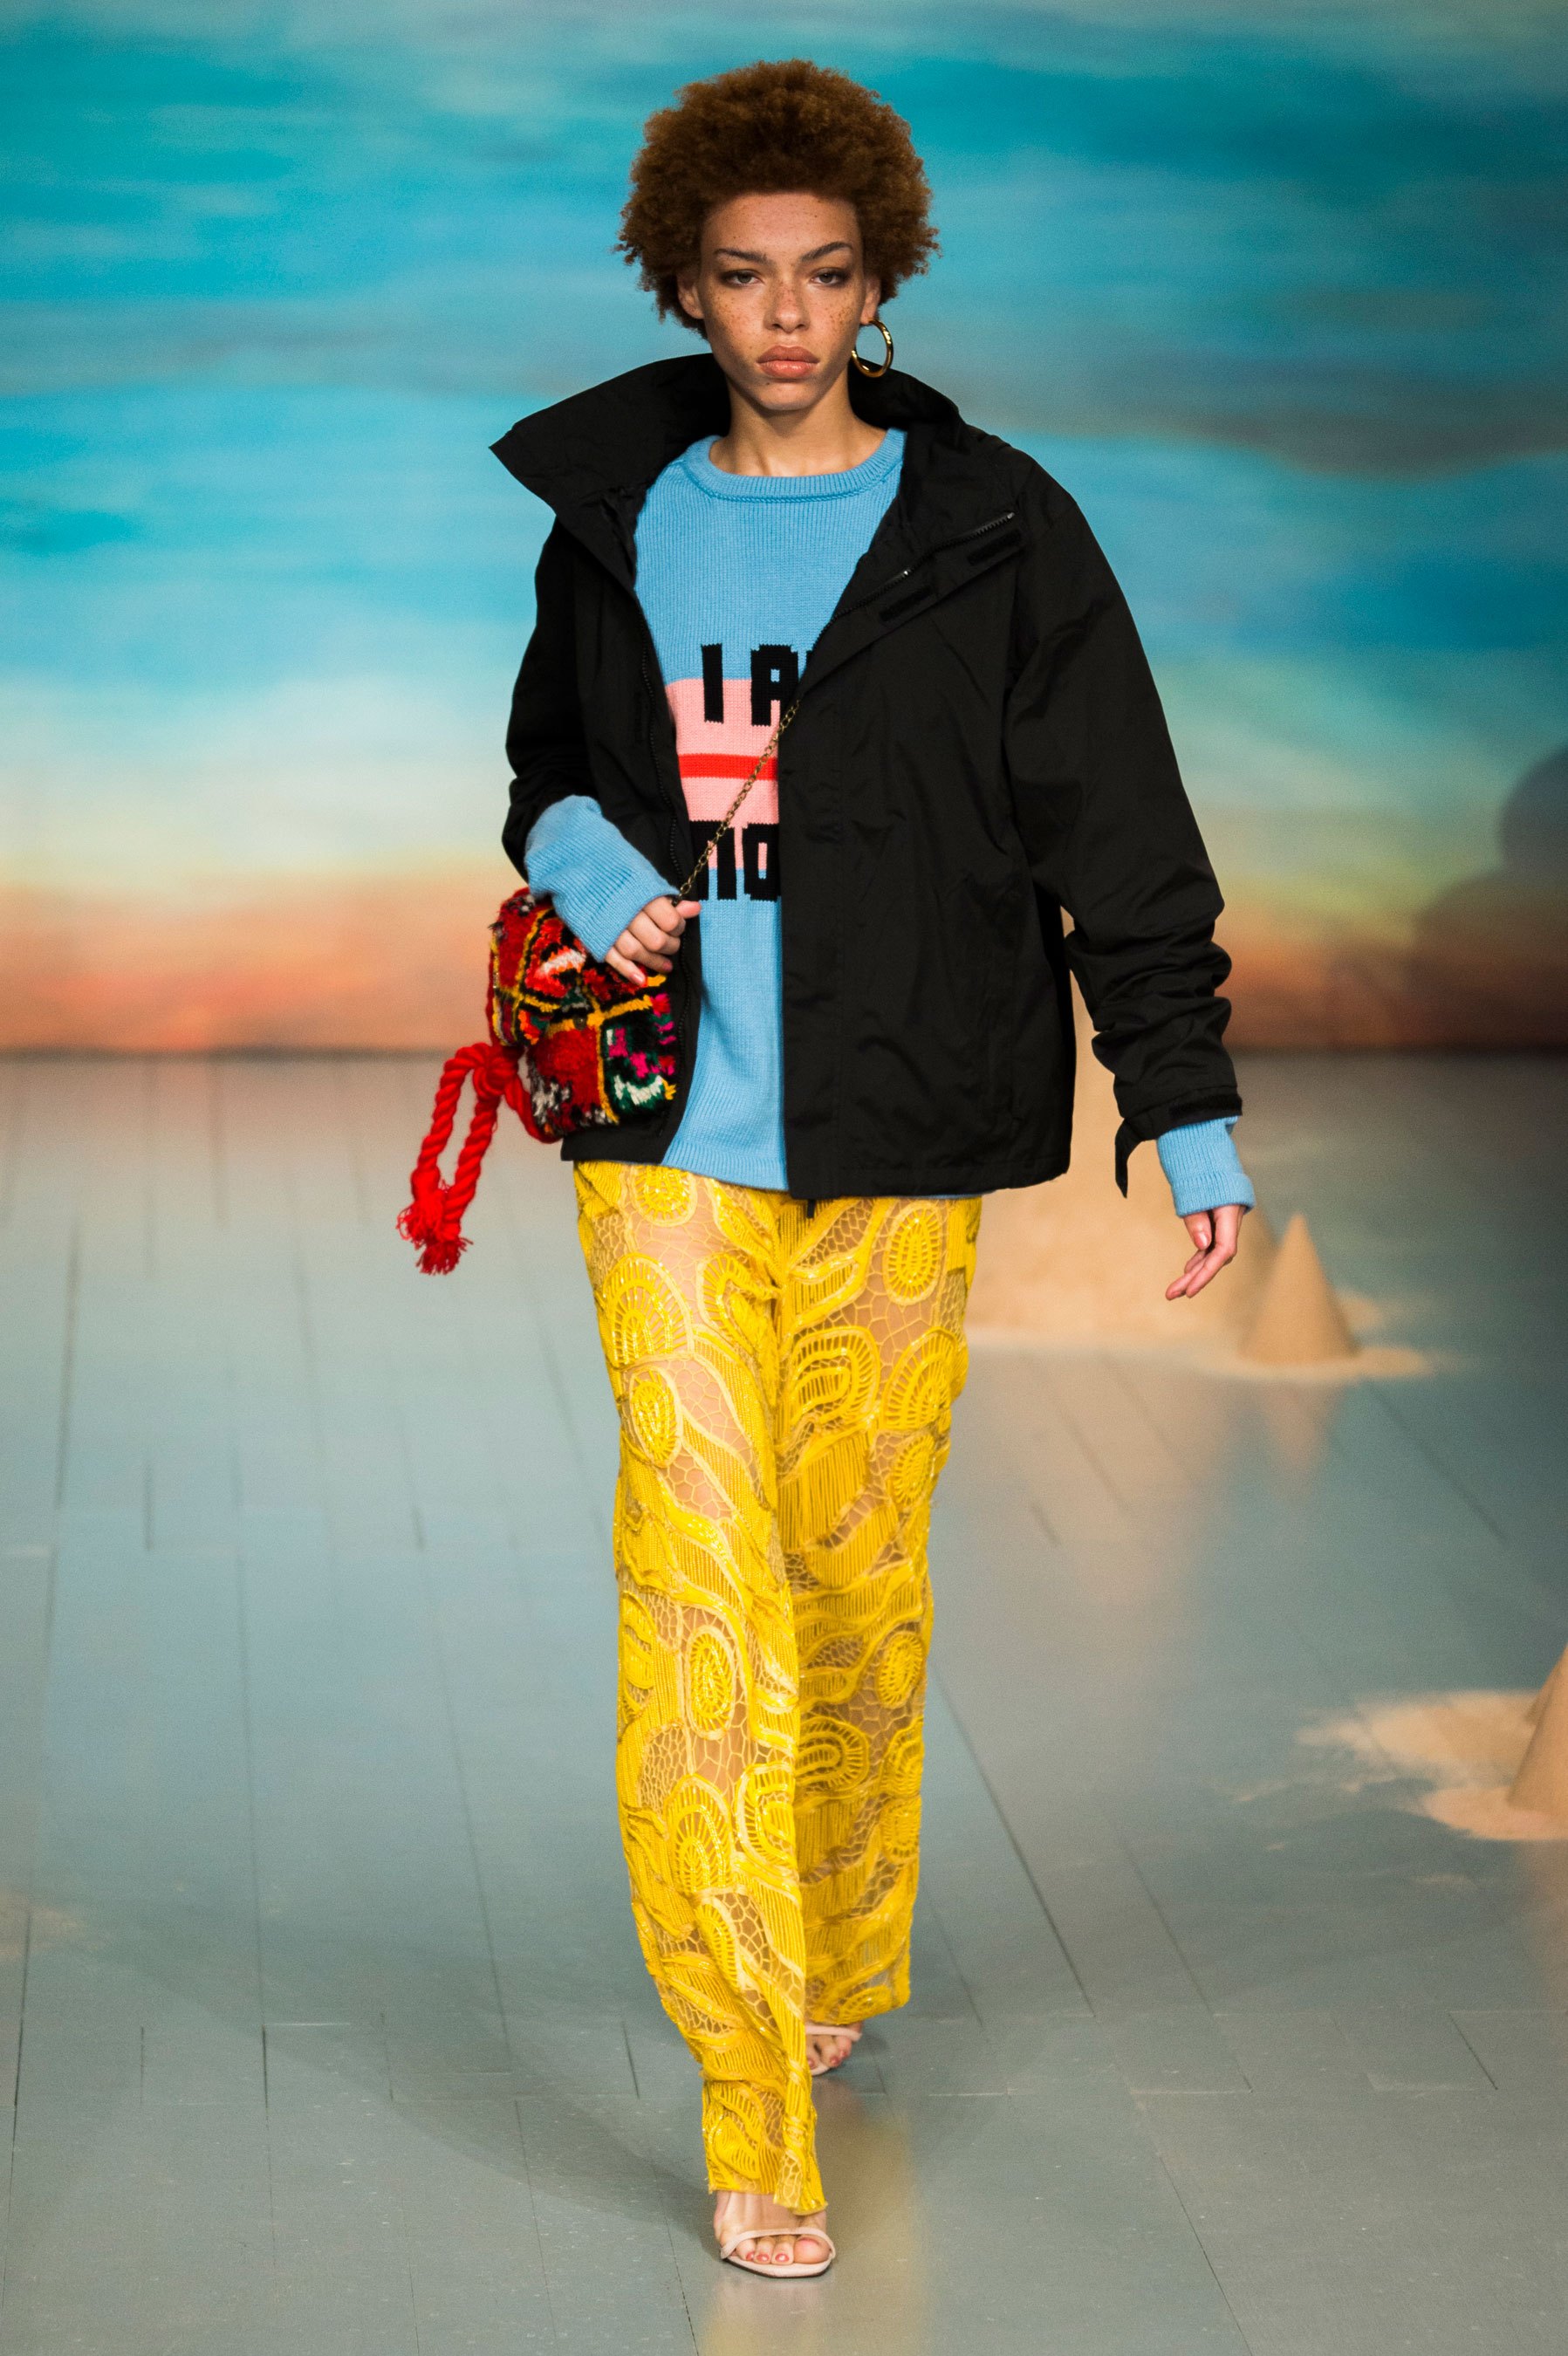 Top 5 Other London Spring 2019 Collections and Fashion Shows - The ...